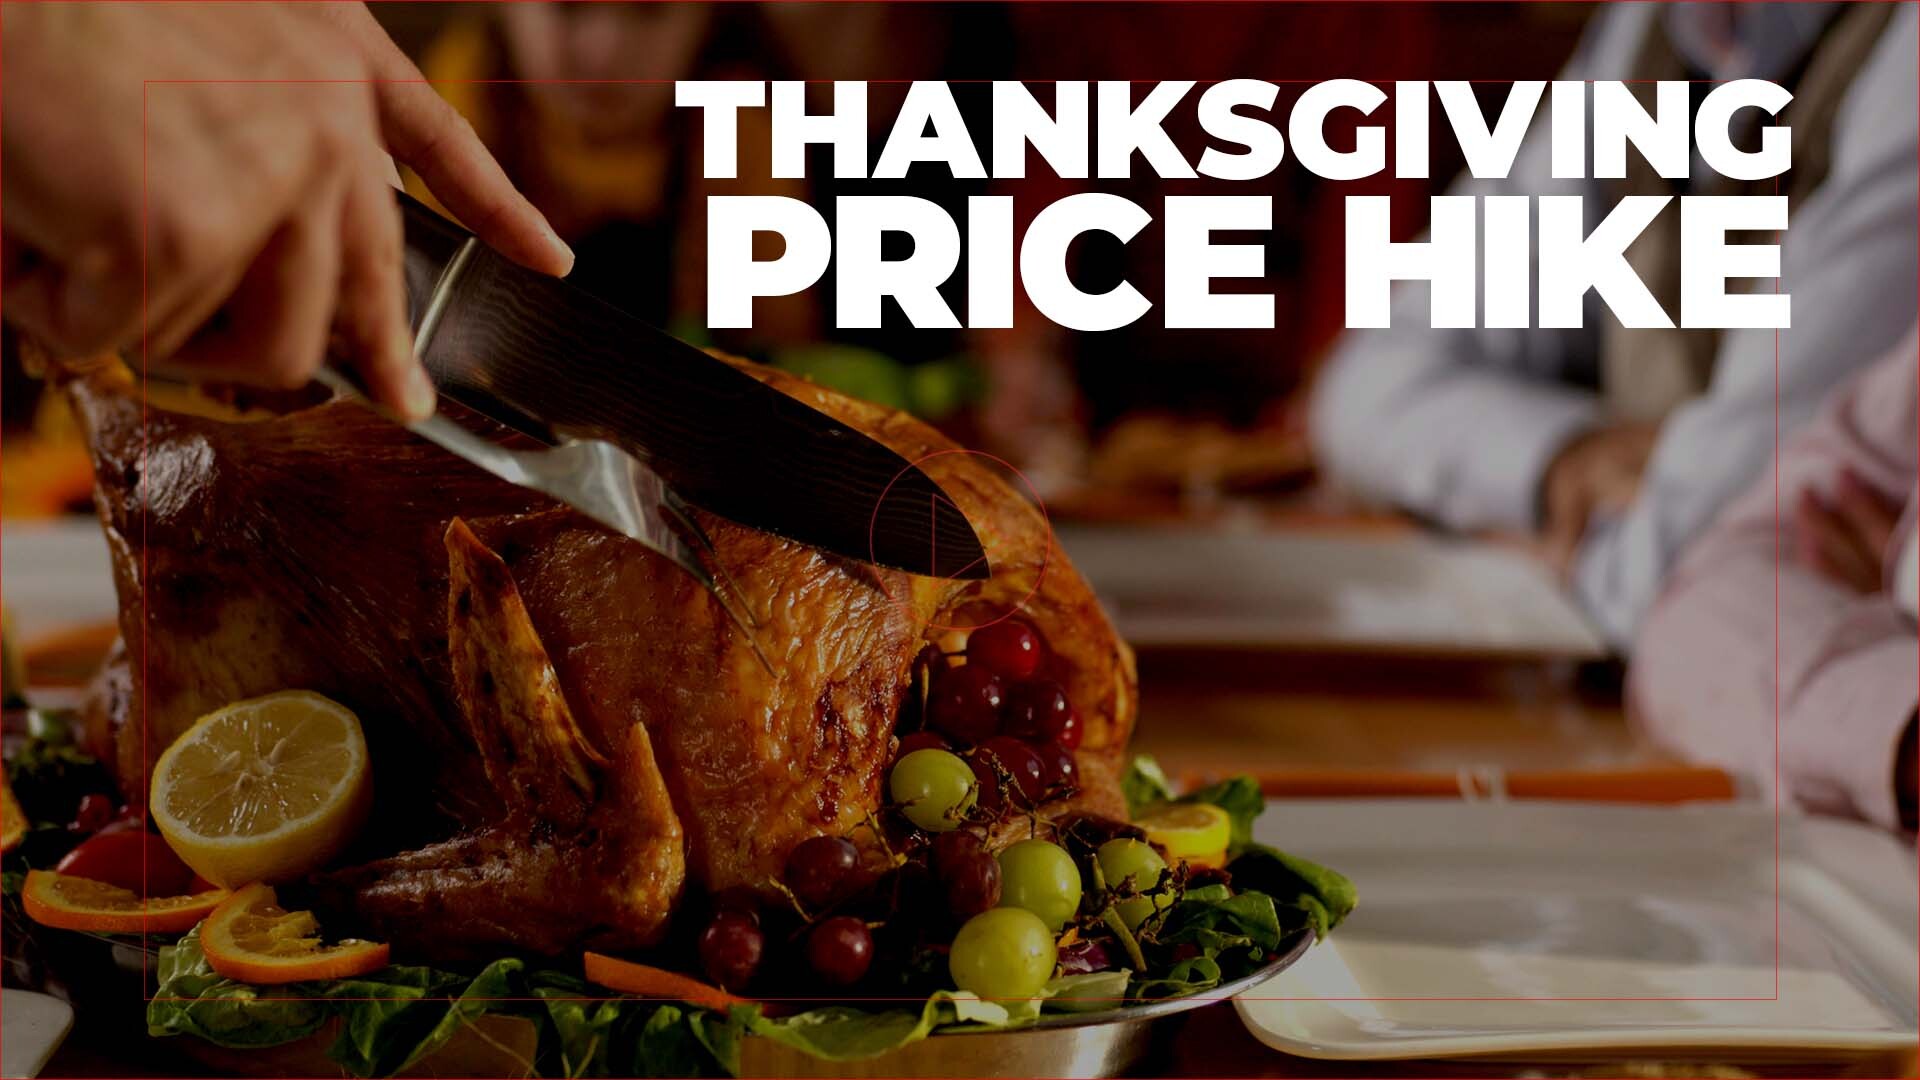 Experts are expected an expensive Thanksgiving.